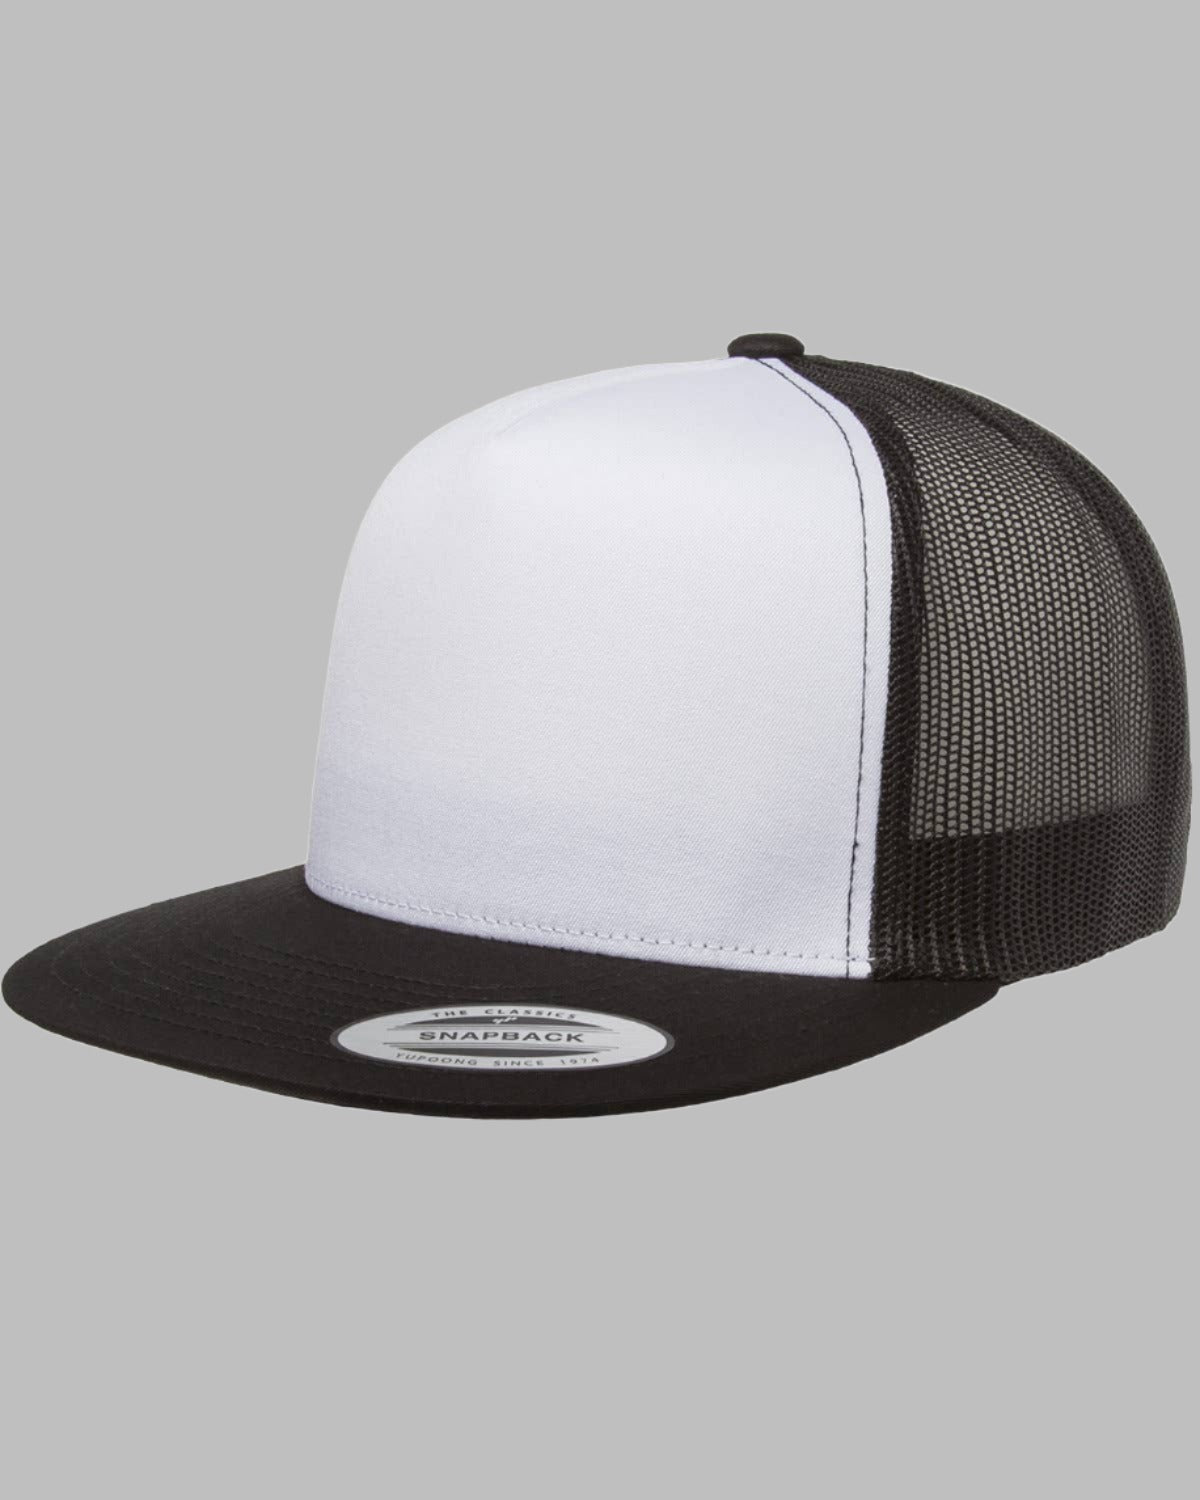 Vintage Trucker Hat with White Front Panel and Mesh Back - Adult Classic Cap with Polyester Blend